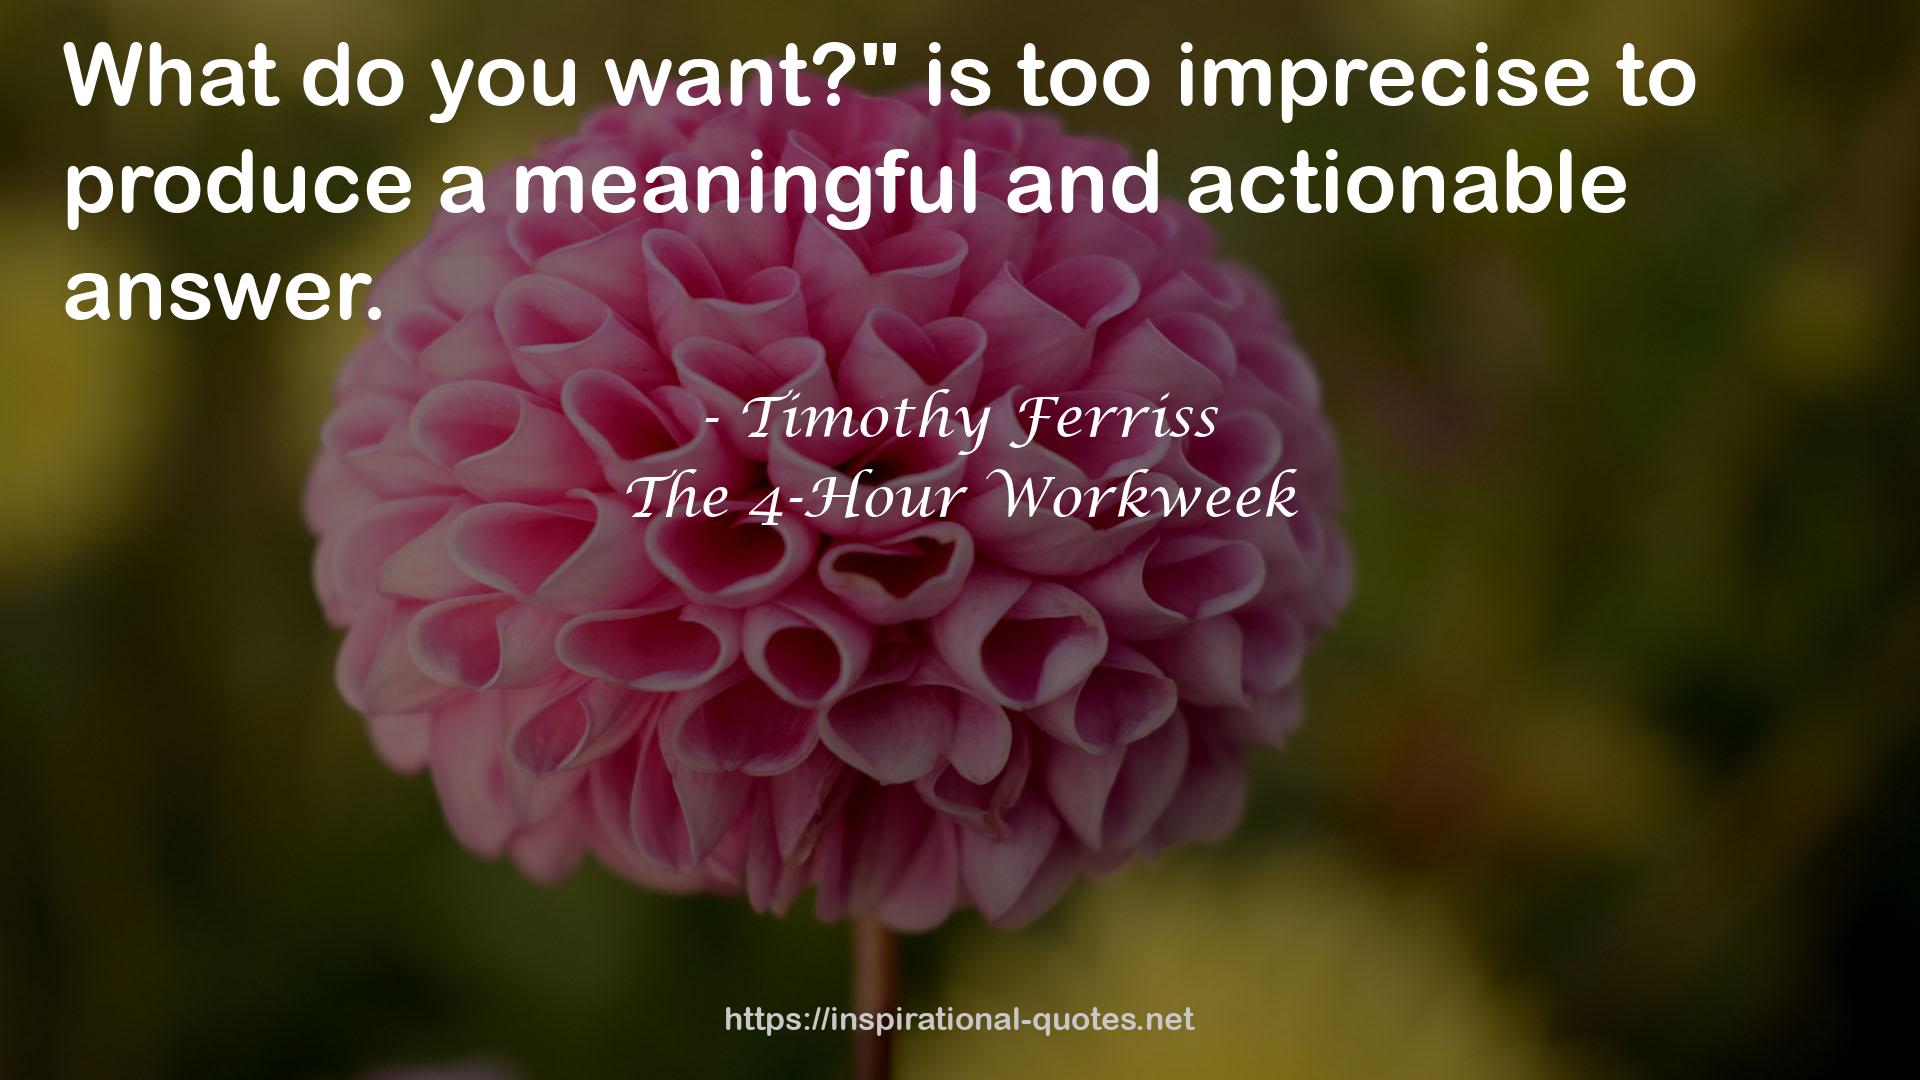 Timothy Ferriss quote : What do you want?